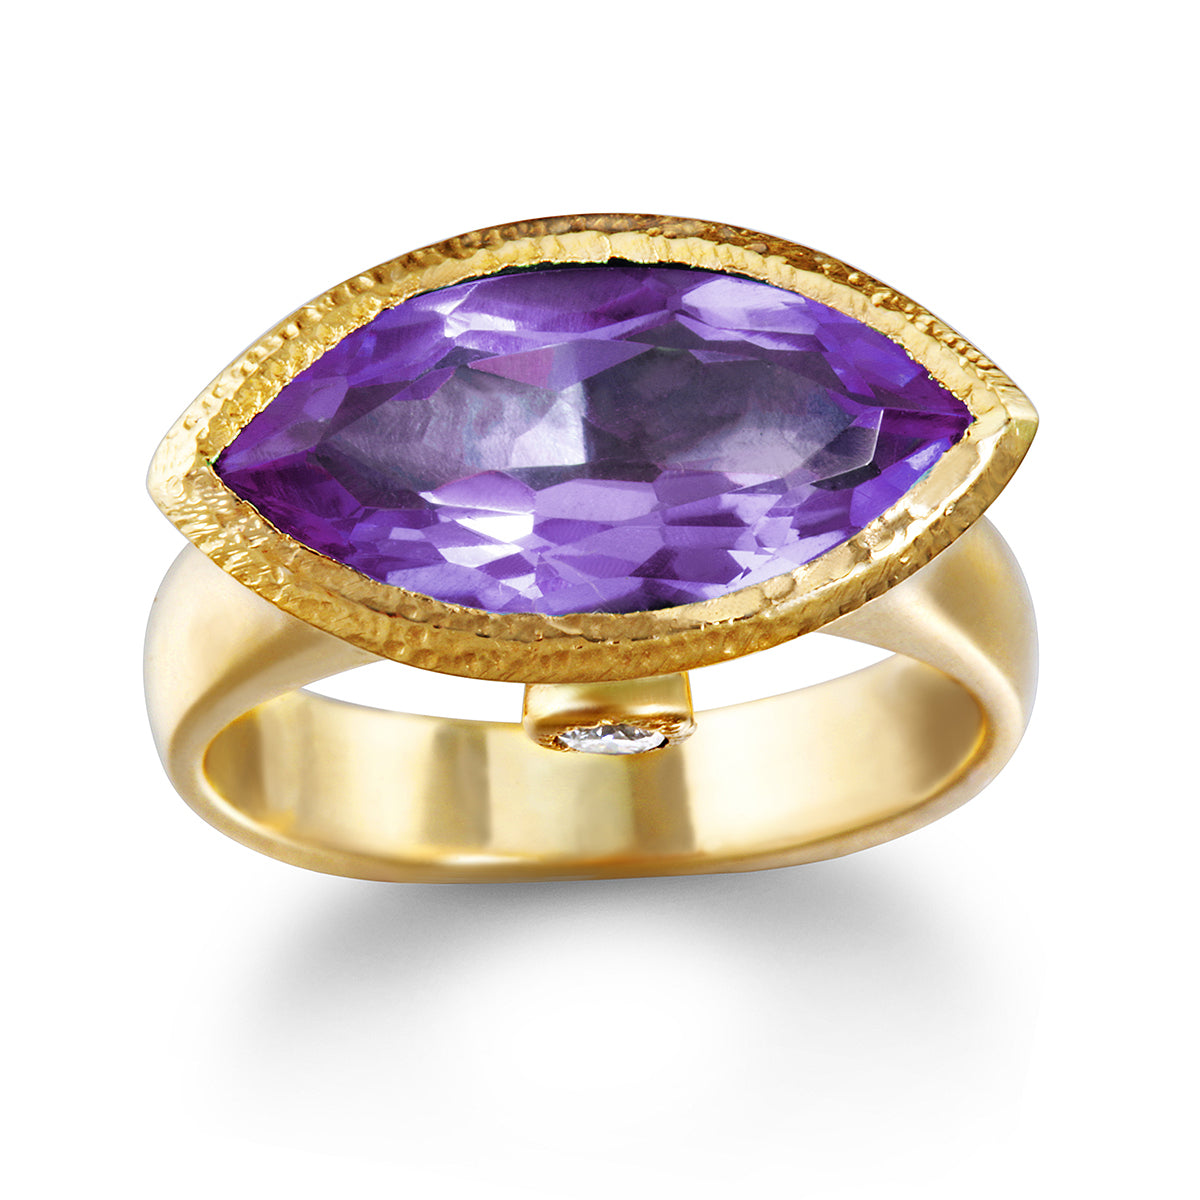 14k Amethyst Ring with White Diamond accents